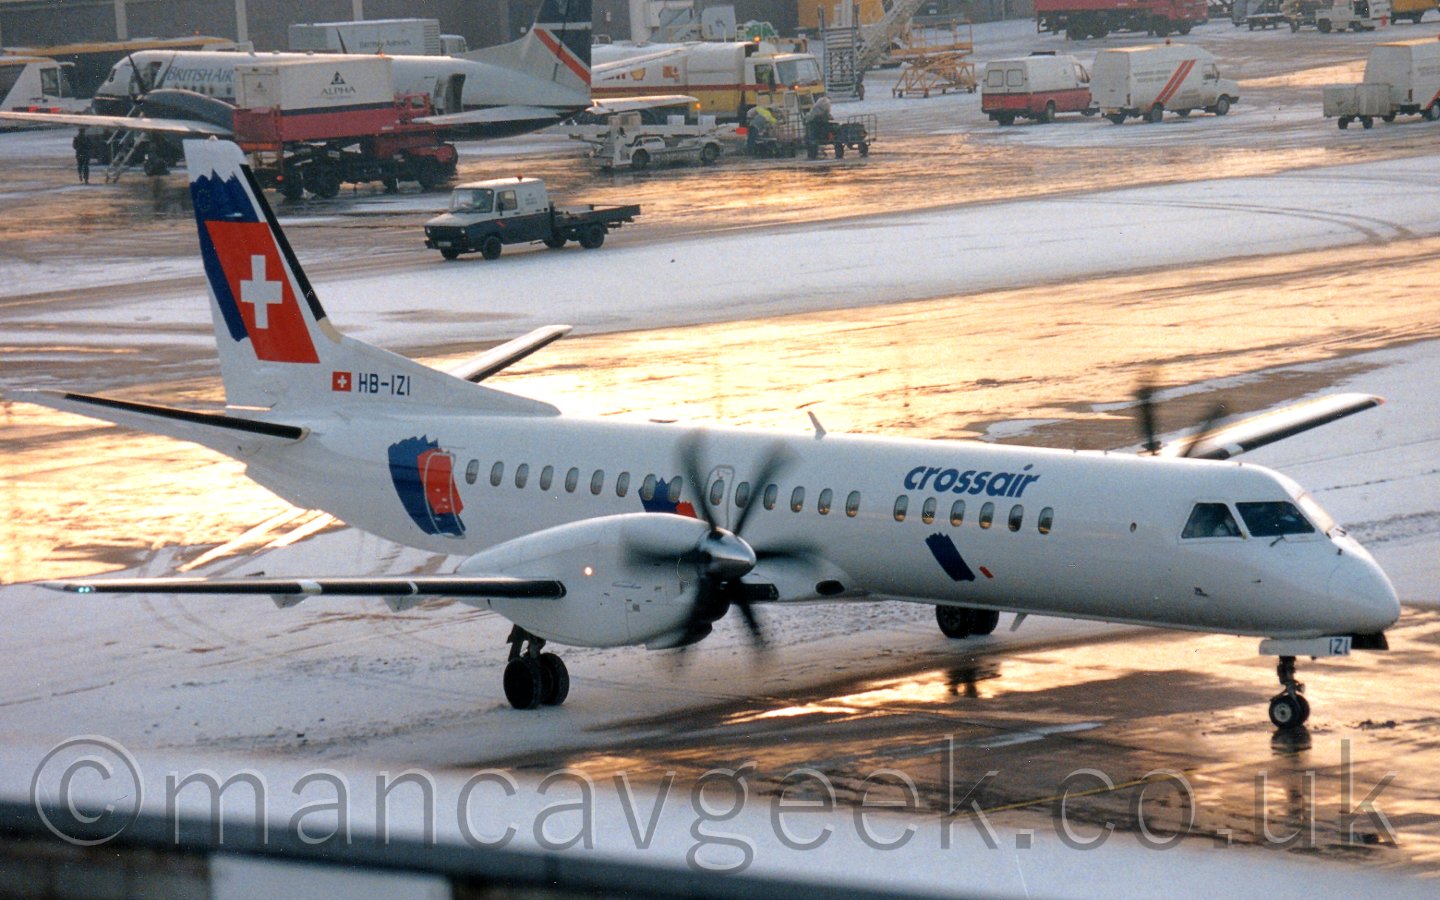 Side view of a white, twin propellor-engined airliner taxiing from left to right, with snow on the ground, and golden light reflecting off some areas that had been cleared on taxiways.